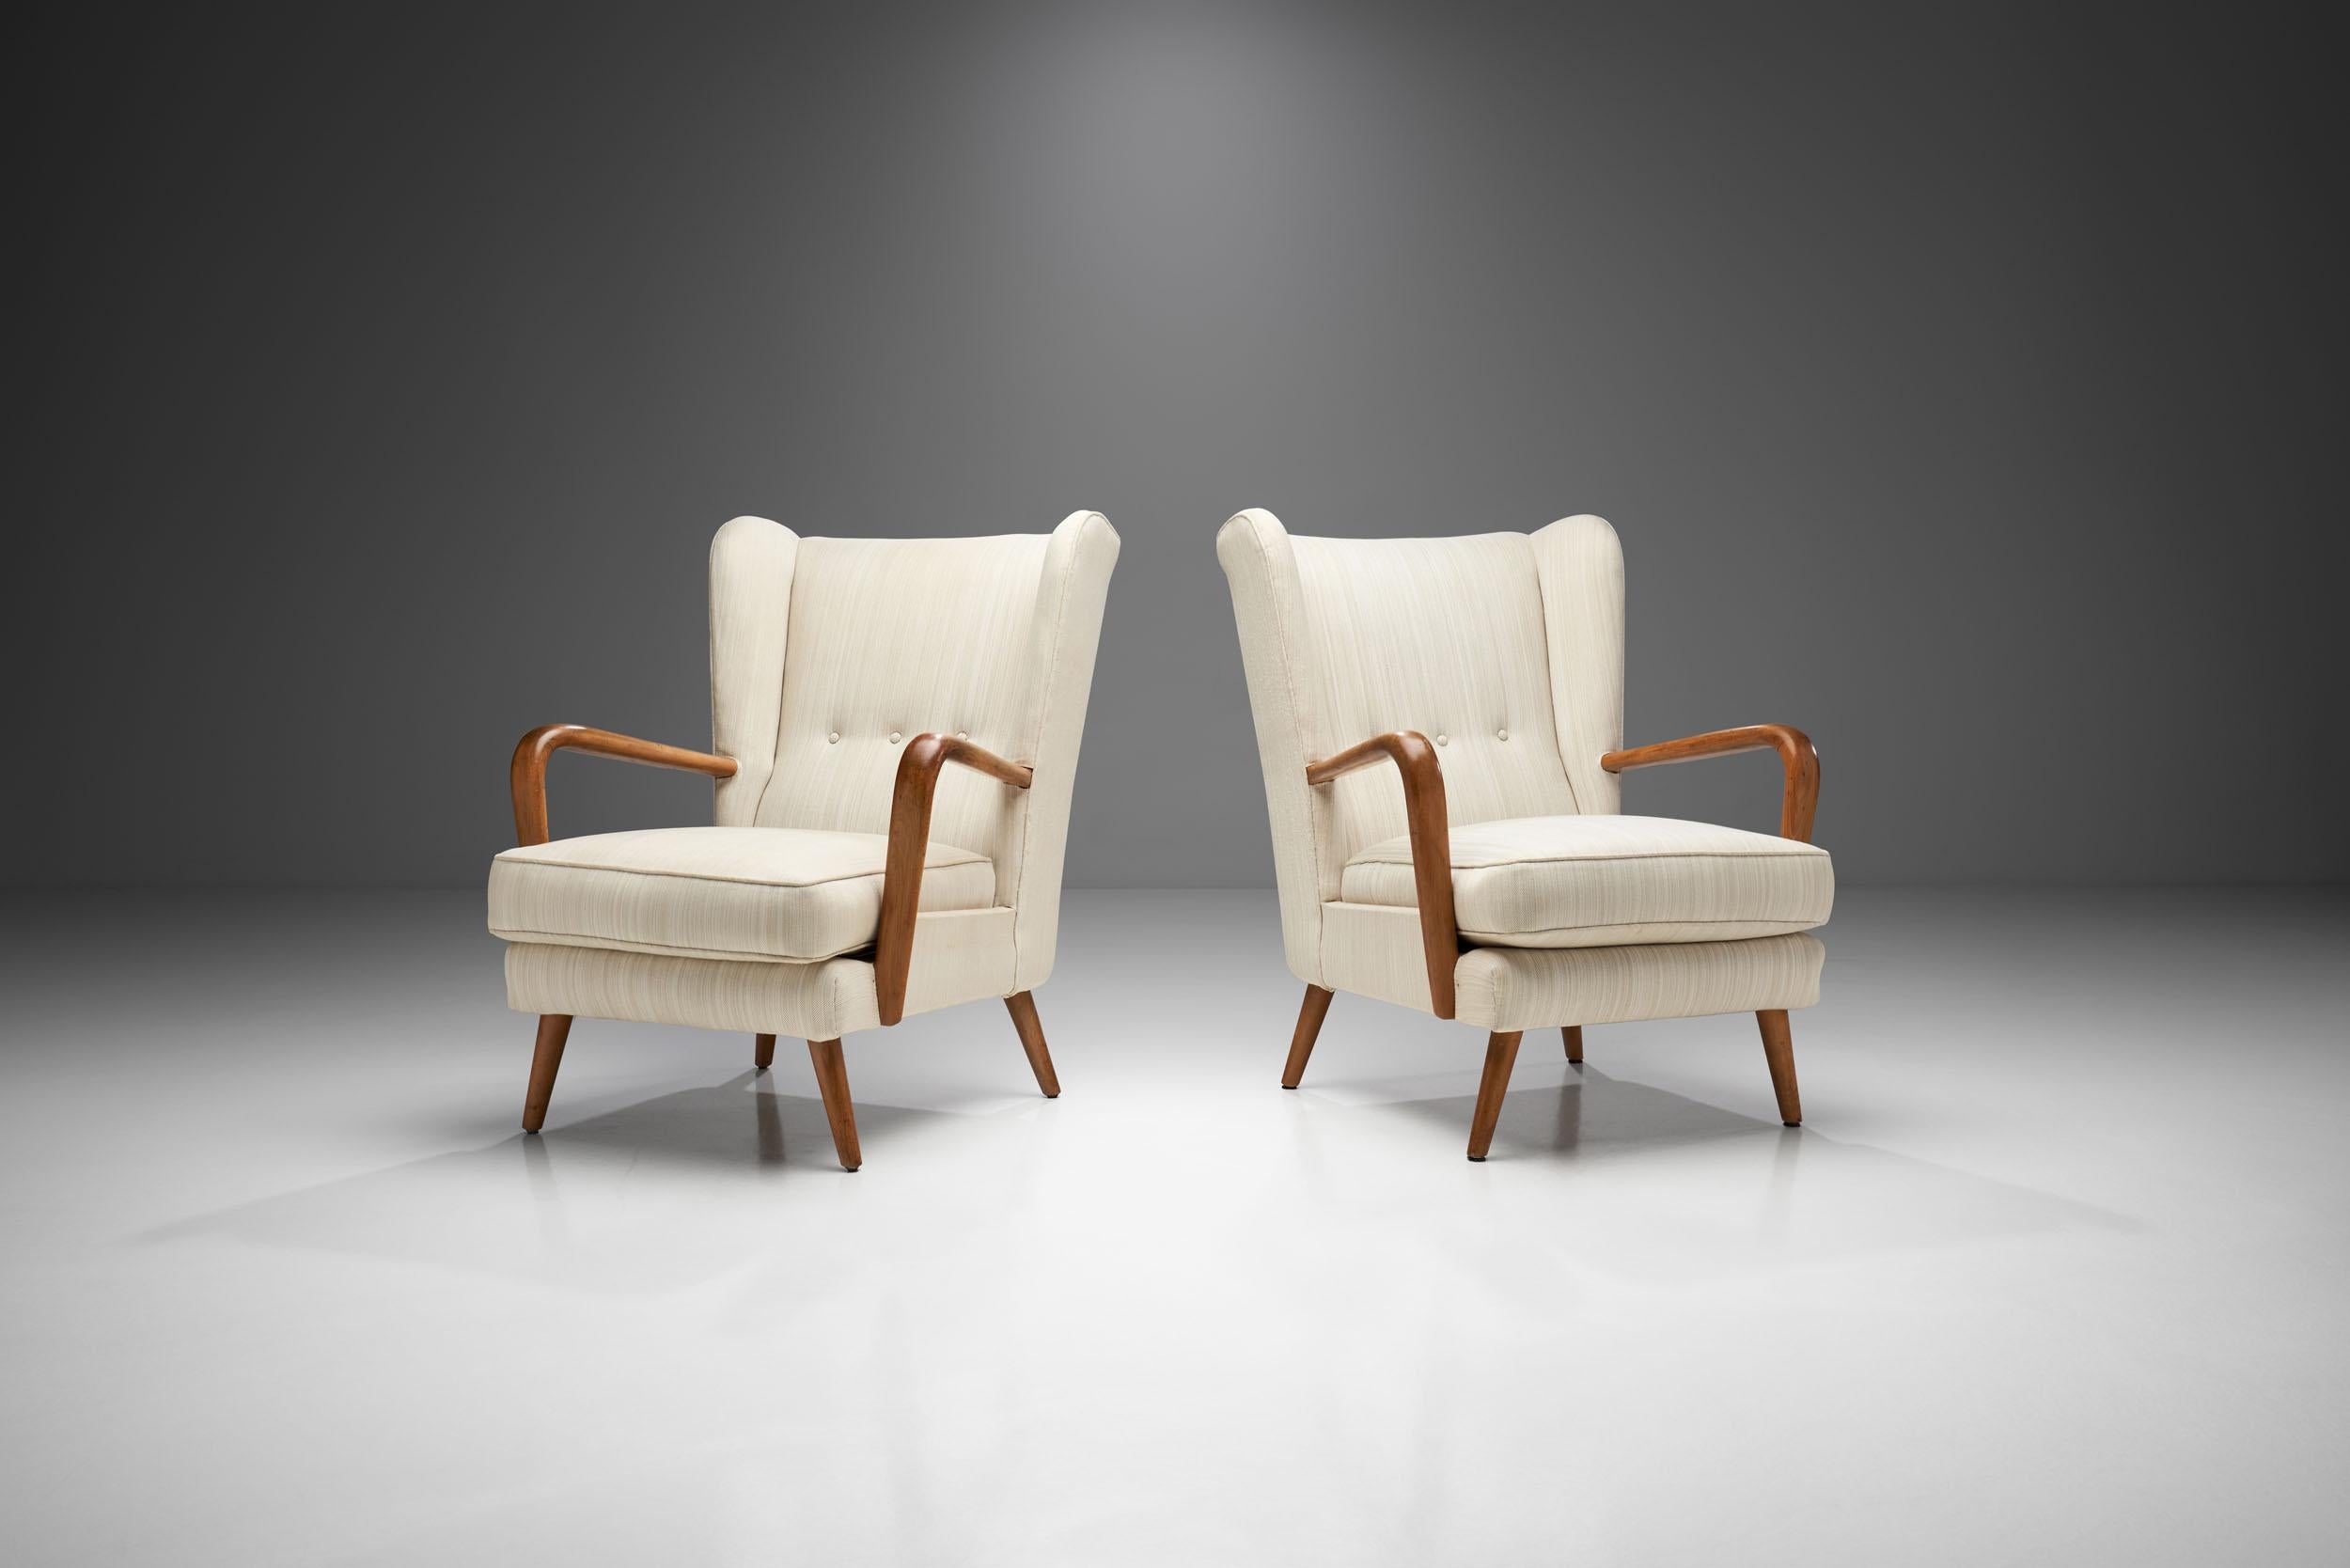 This present pair of Howard Keith “Bambino” armchairs is a piece of history of a company, HK Furniture, and mid-century English design. By absorbing creative influences from abroad, but formulating a distinctive home-grown approach, Howard Keith was